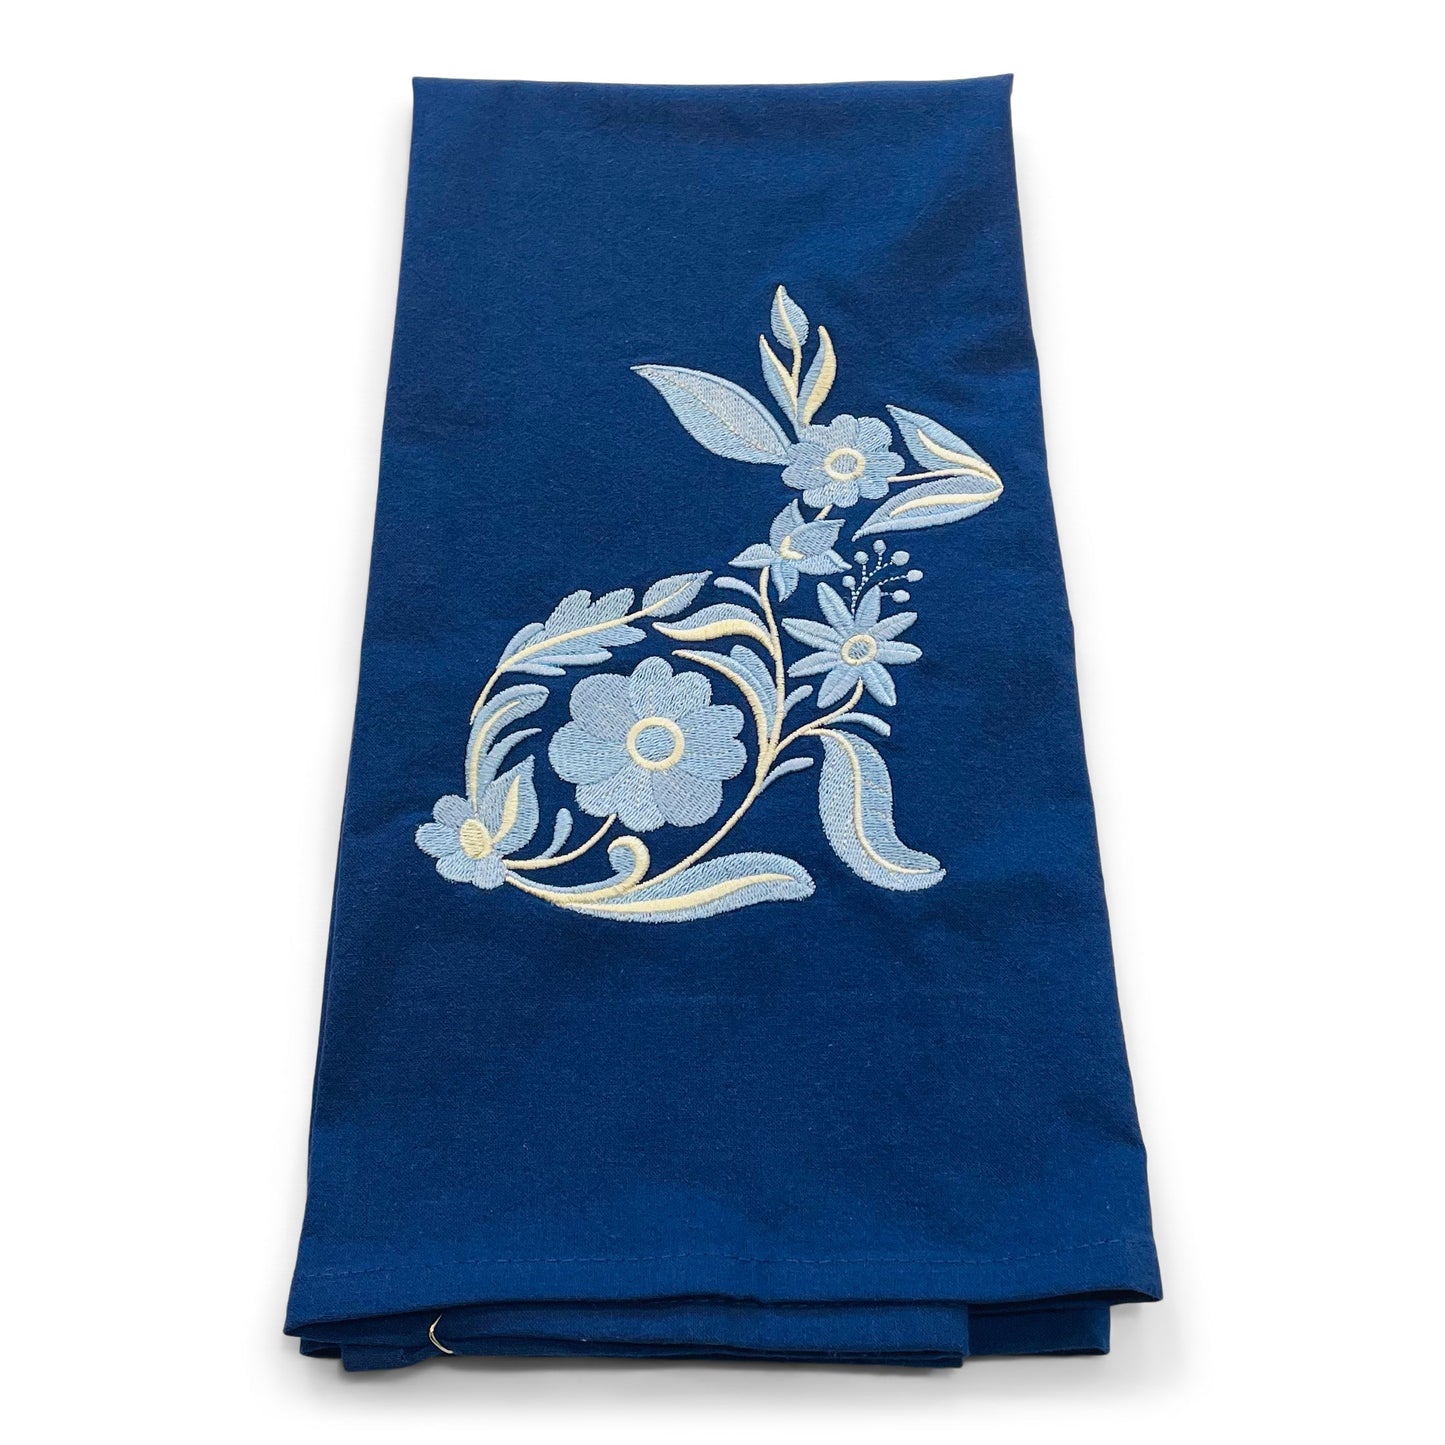 Towel  - Blue Bunny Spring Easter on Navy